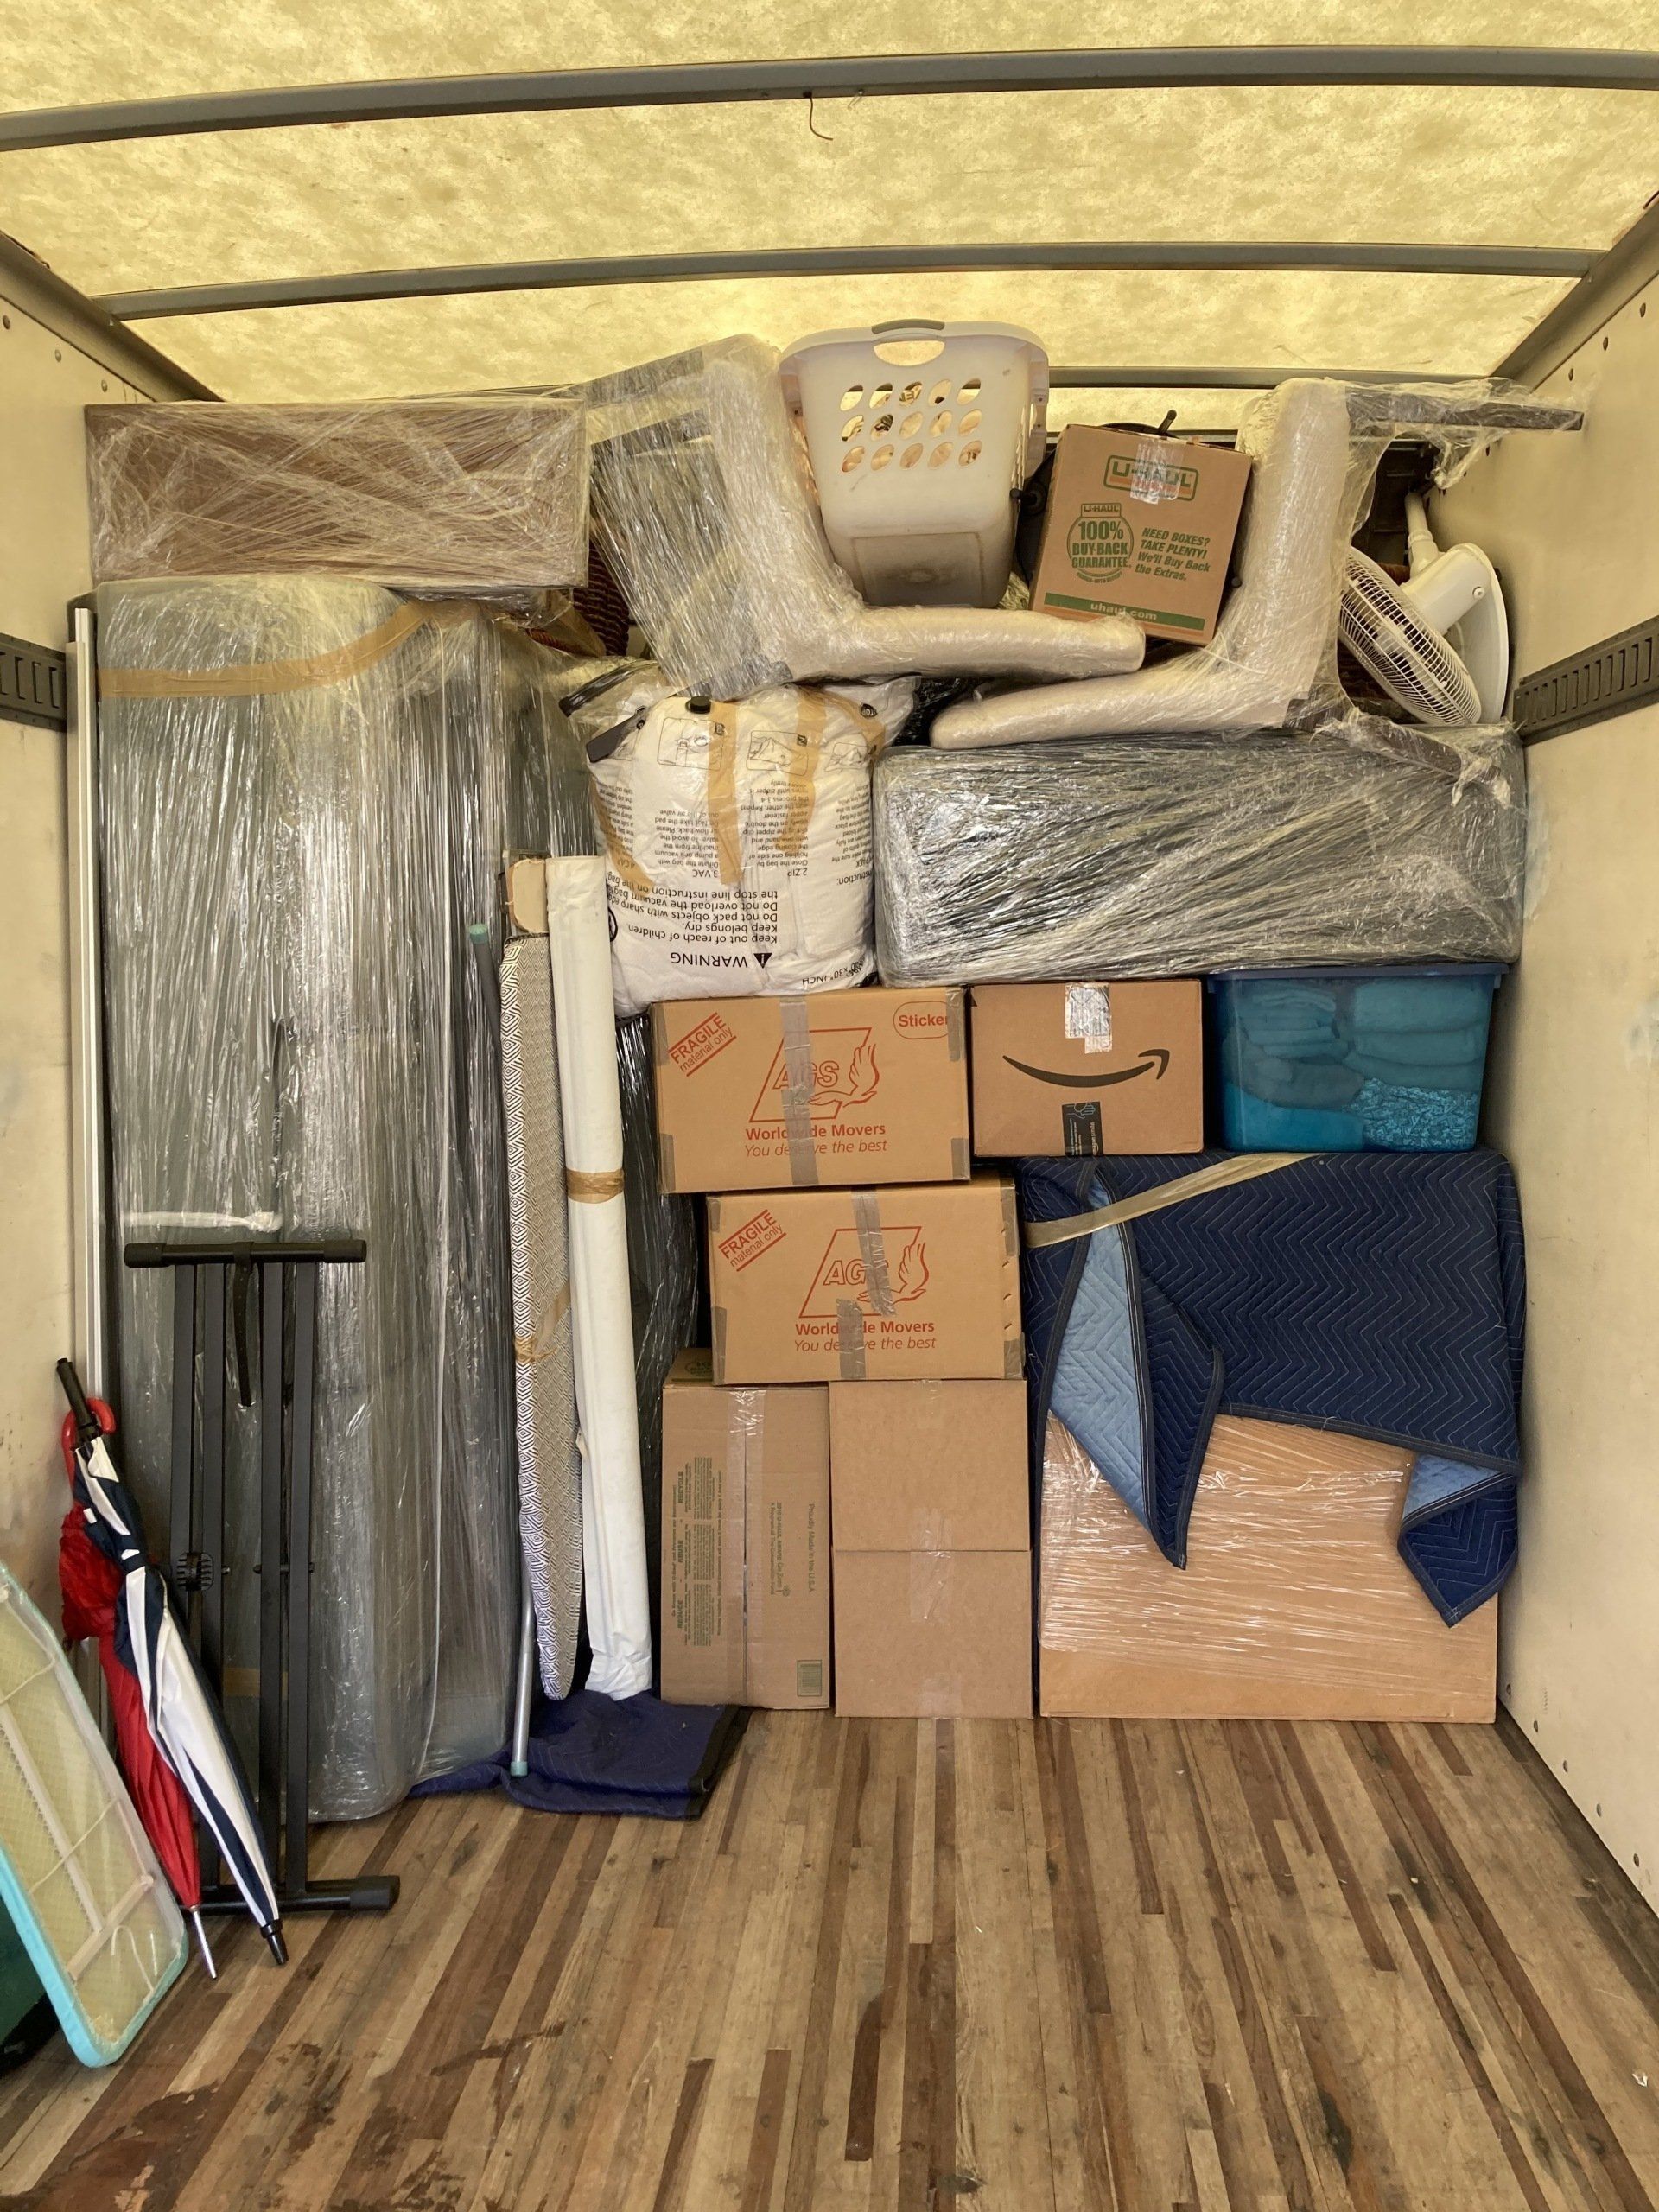 House furniture and other things put in the truck